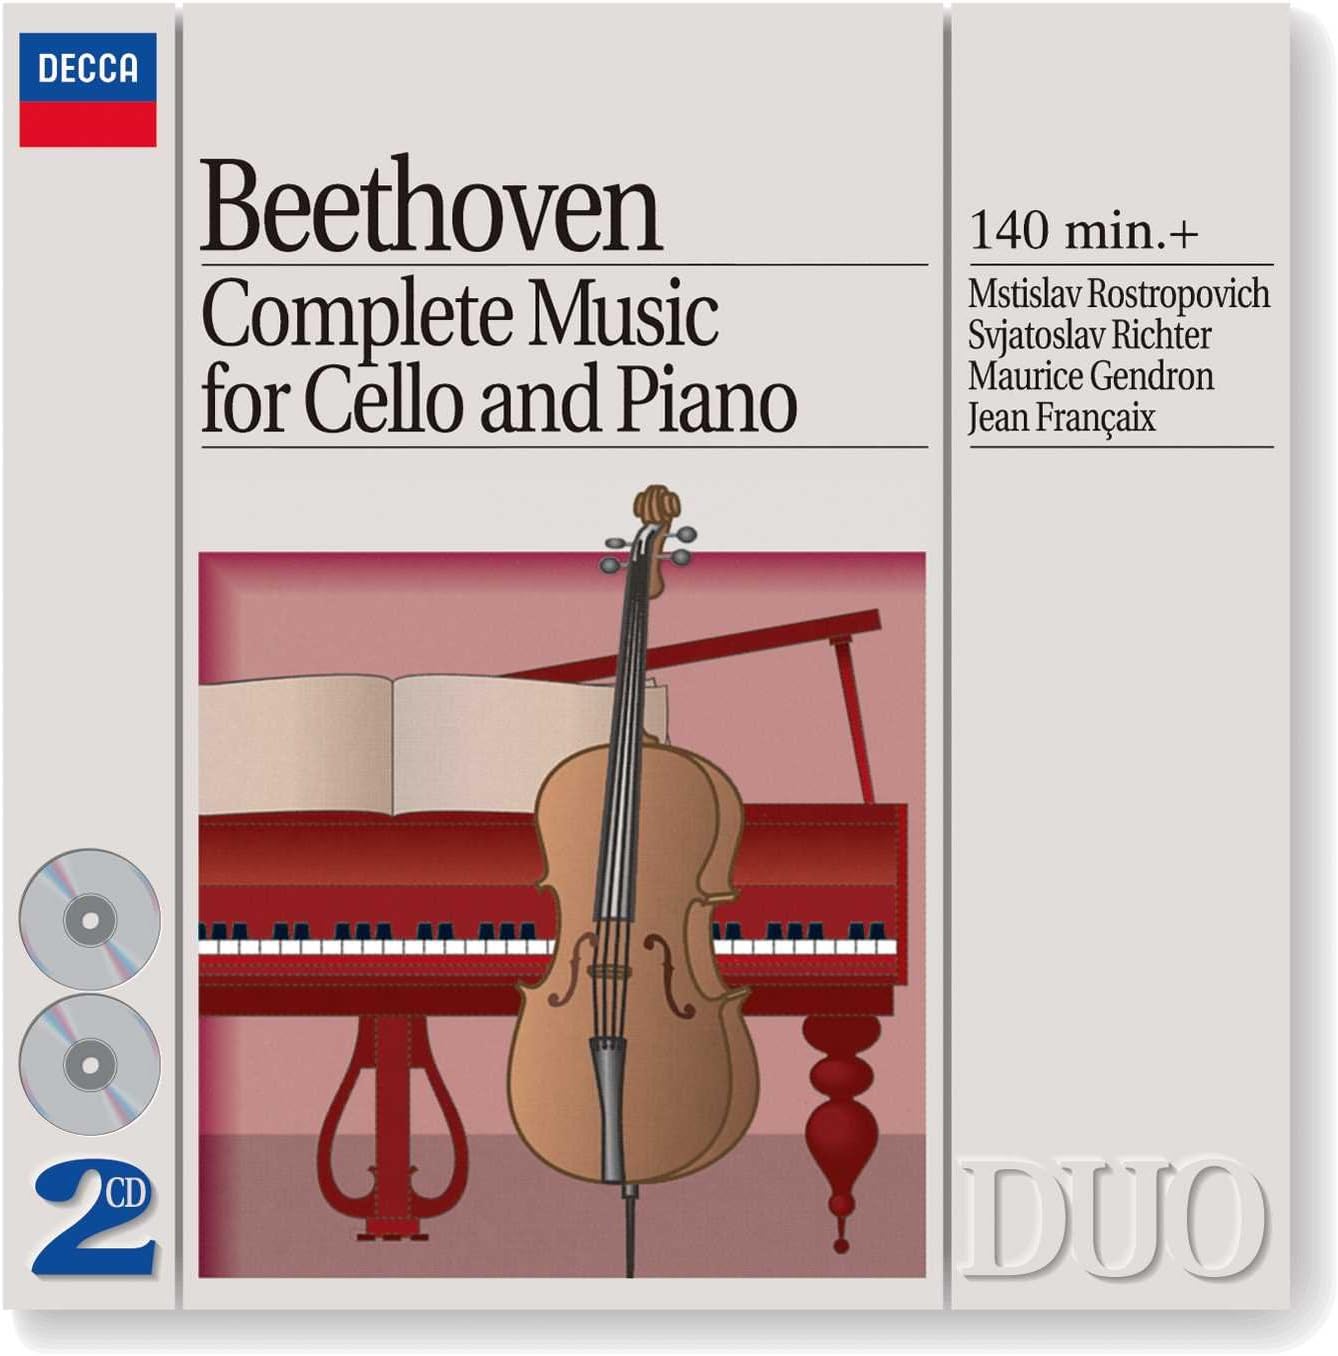 Beethoven - Complete Music for Cello & Piano | Ludwig van Beethoven, Mstislav Rostropovich, Sviatoslav Richter